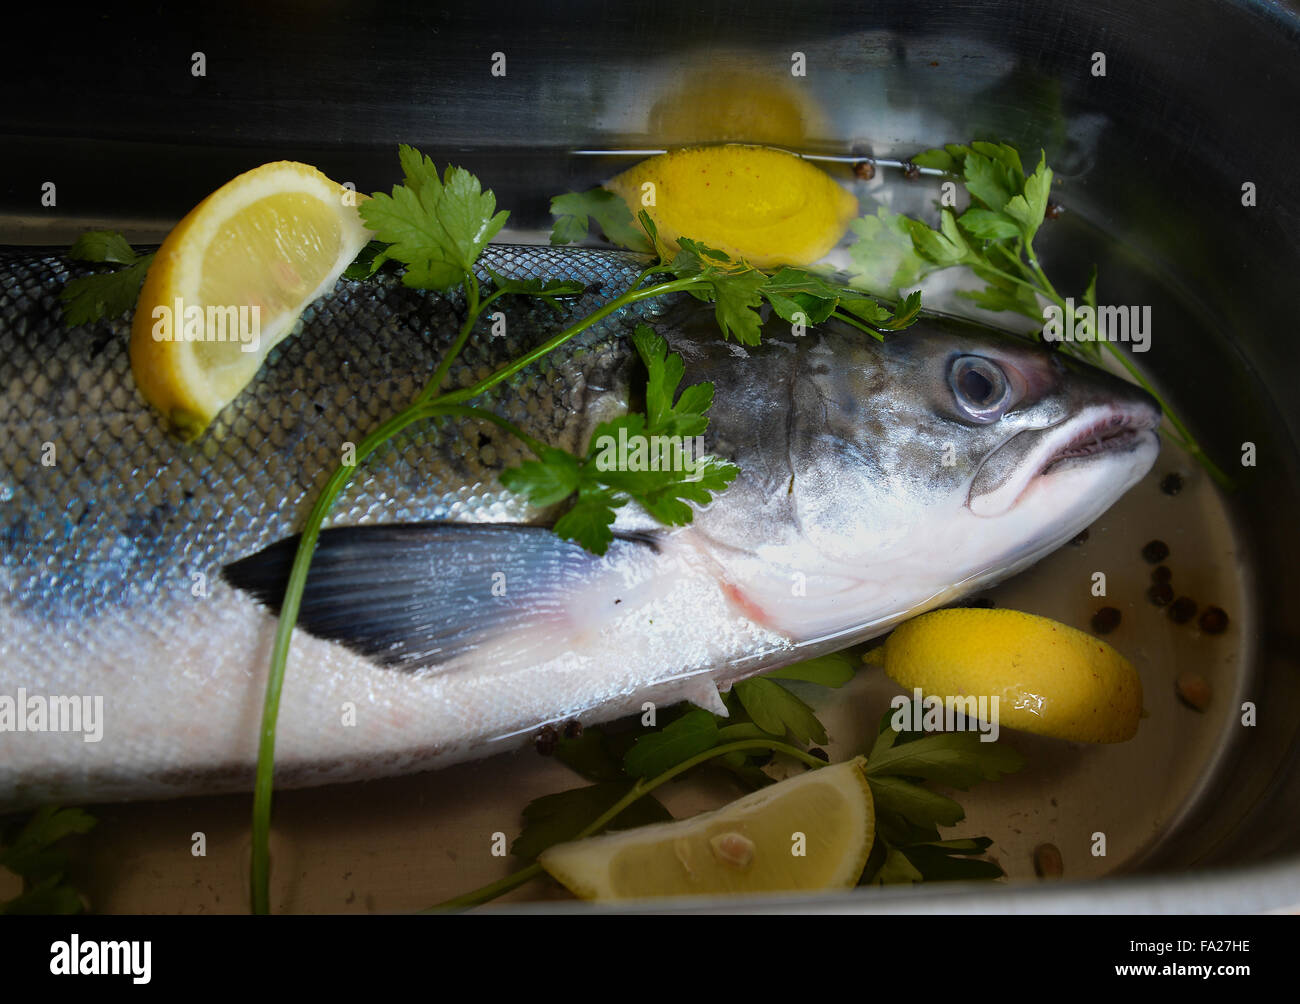 A whole fresh salmon prepared and ready to be cooked Stock Photo